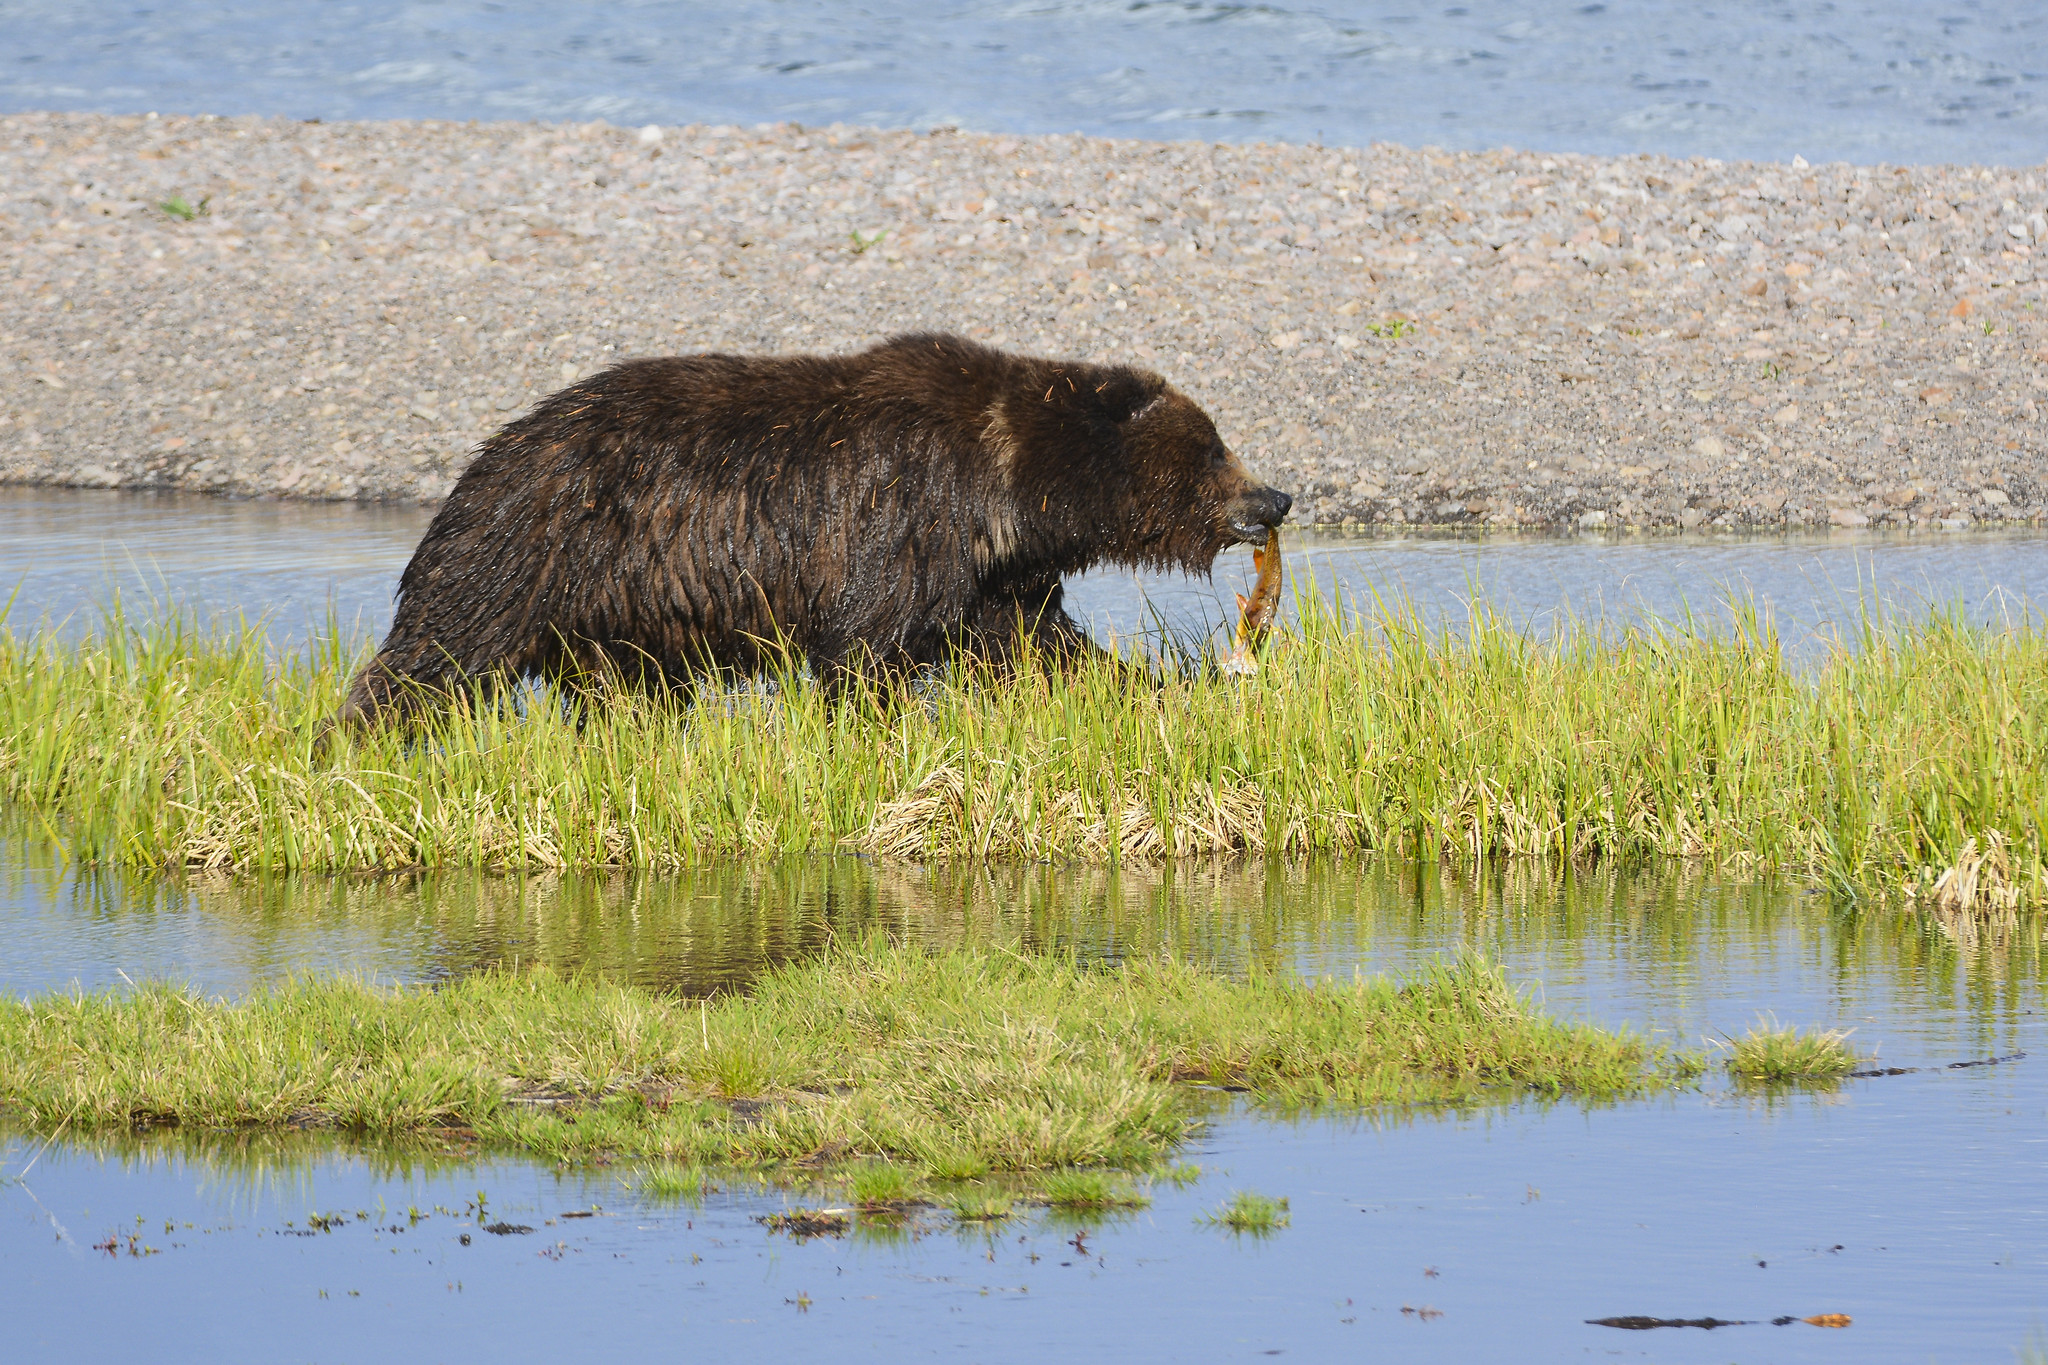 grizzly bear walking next to river carrying fish in its mouth